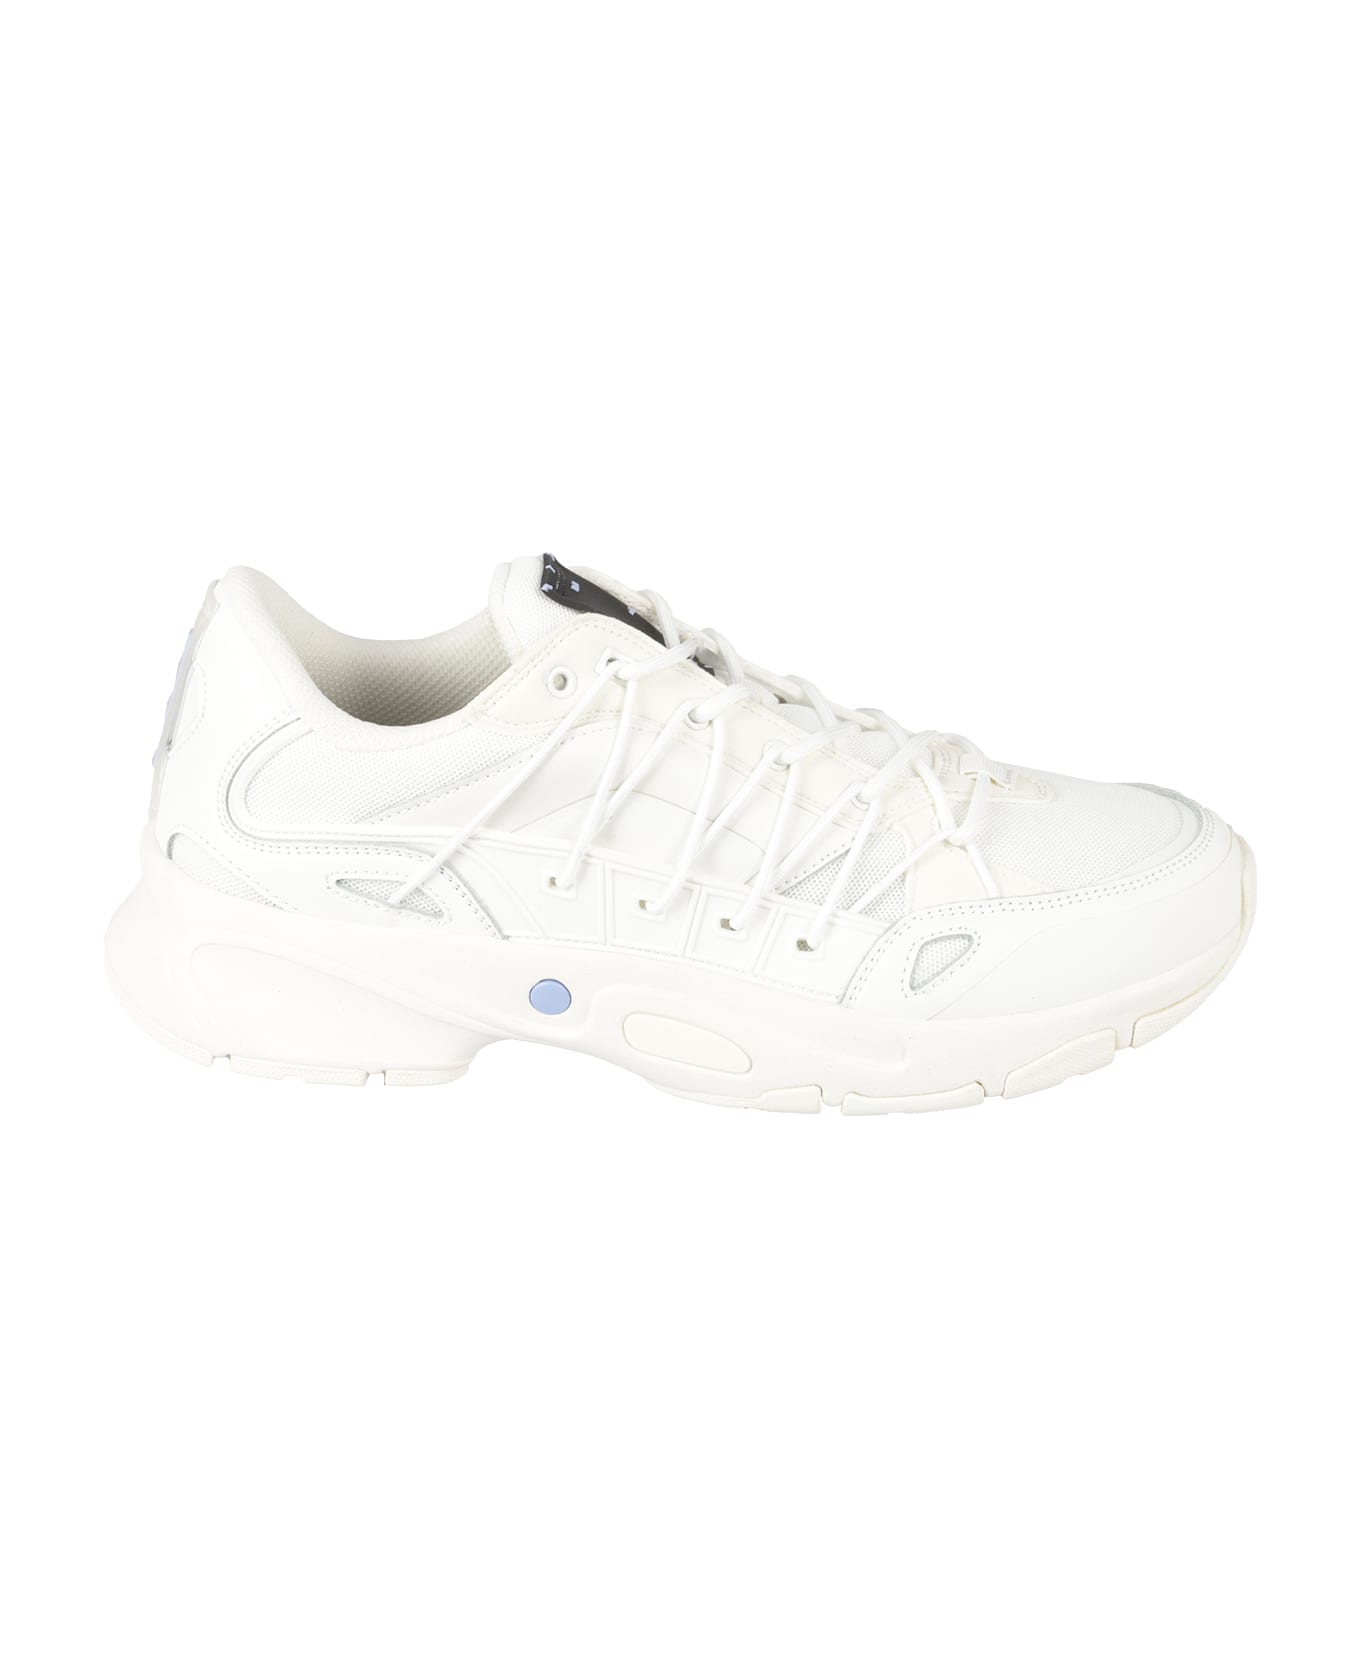 McQ Alexander McQueen Sneakers Shoes - White